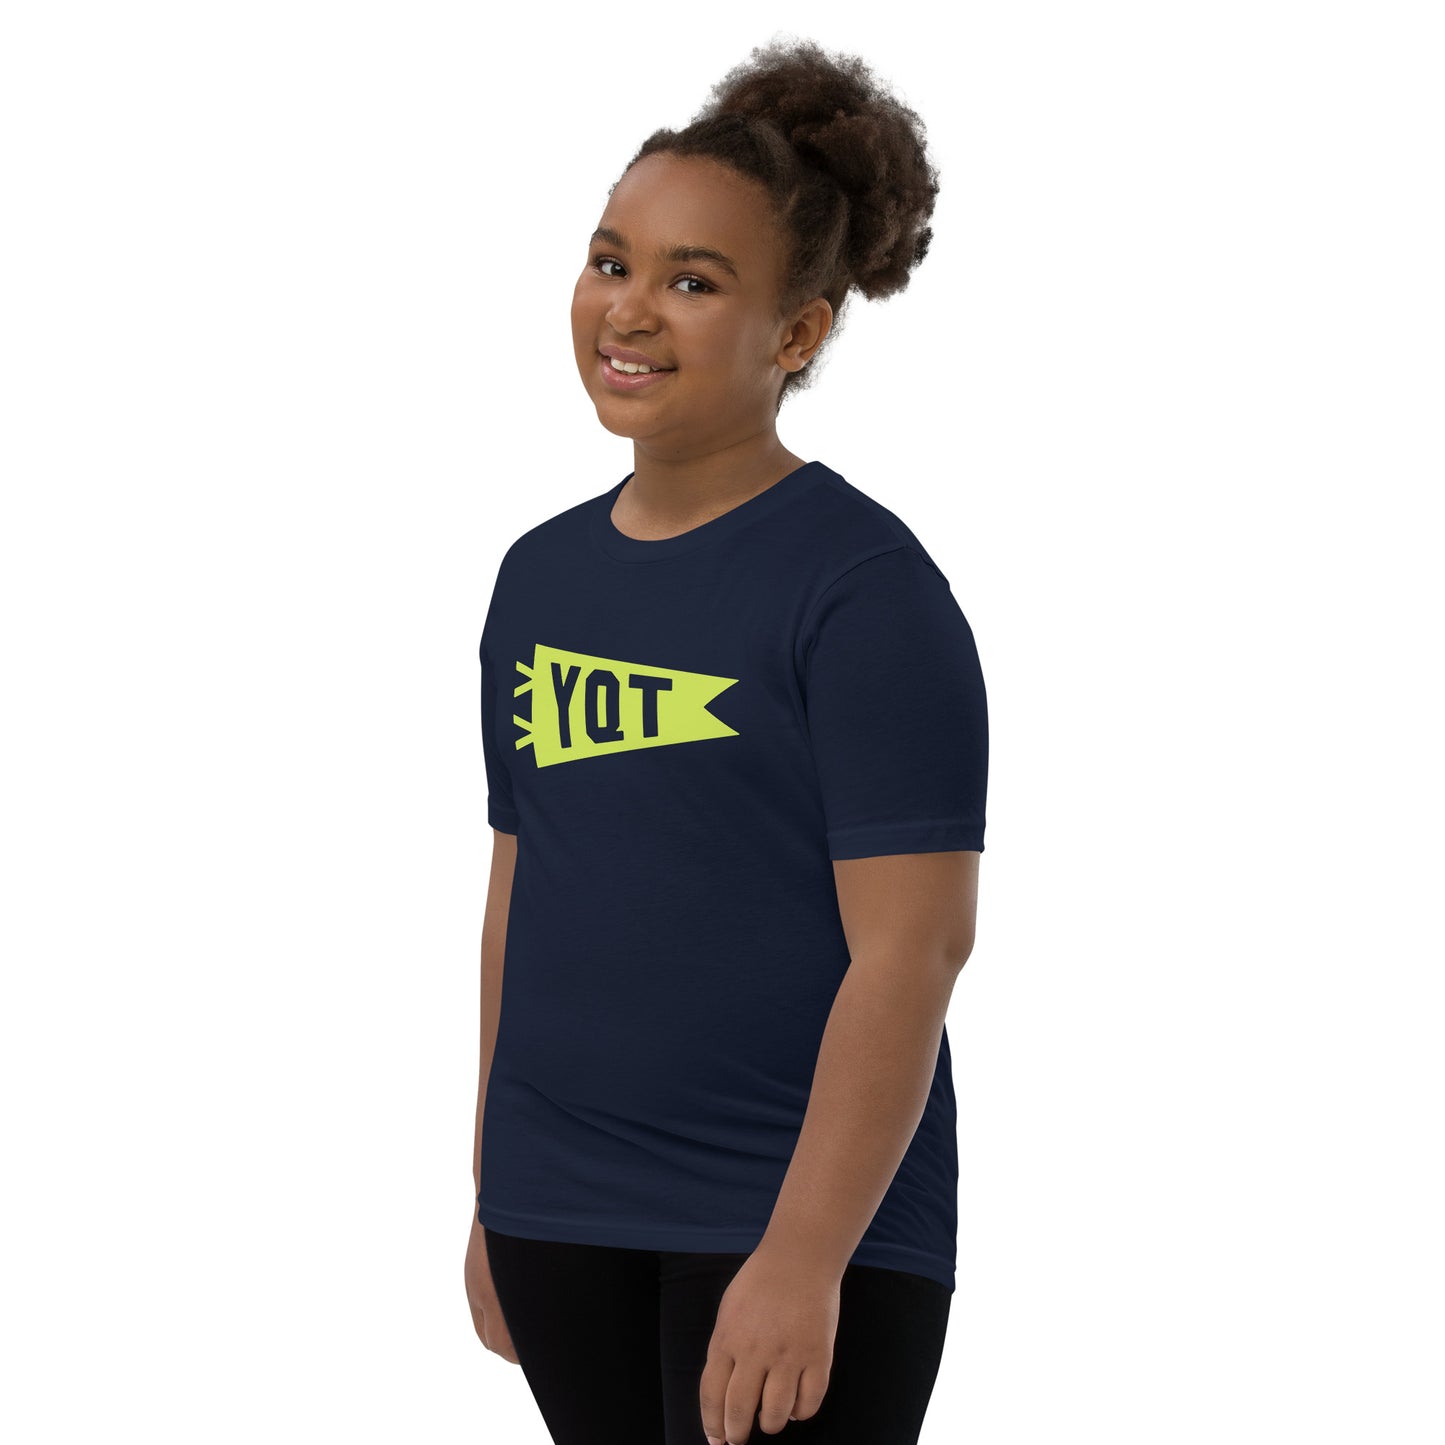 Kid's Airport Code Tee - Green Graphic • YQT Thunder Bay • YHM Designs - Image 04